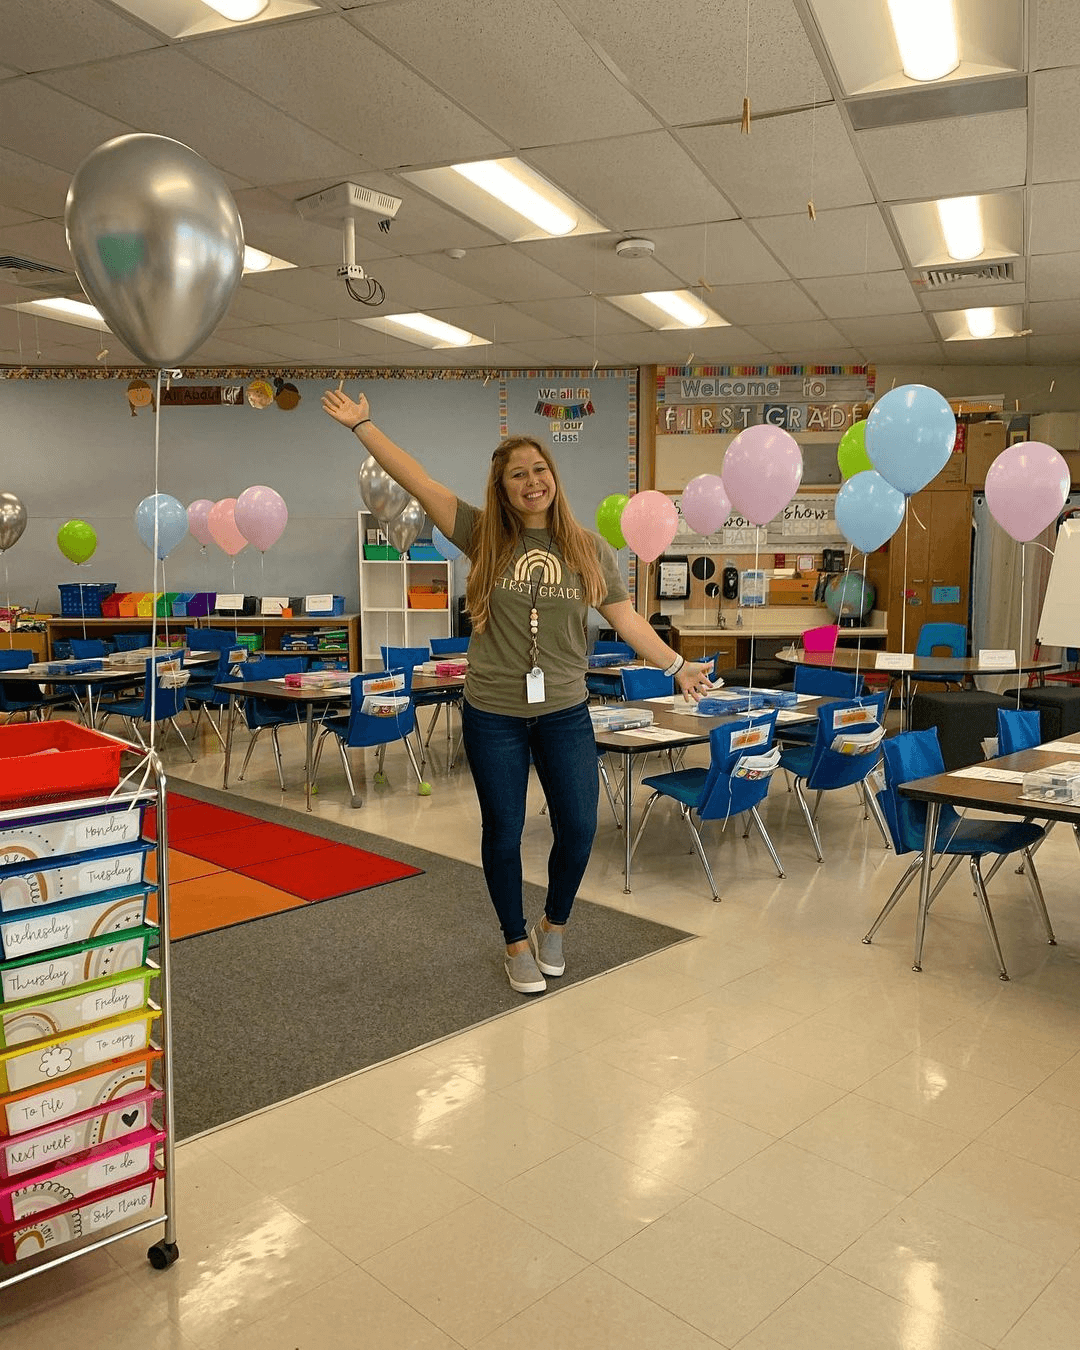 The left image shows a birthday display in bright primary colours, with bunting letters that spell out ‘celebrate.’ The left image shows a teacher in a big classroom, and each of the chairs have a helium balloon attached.